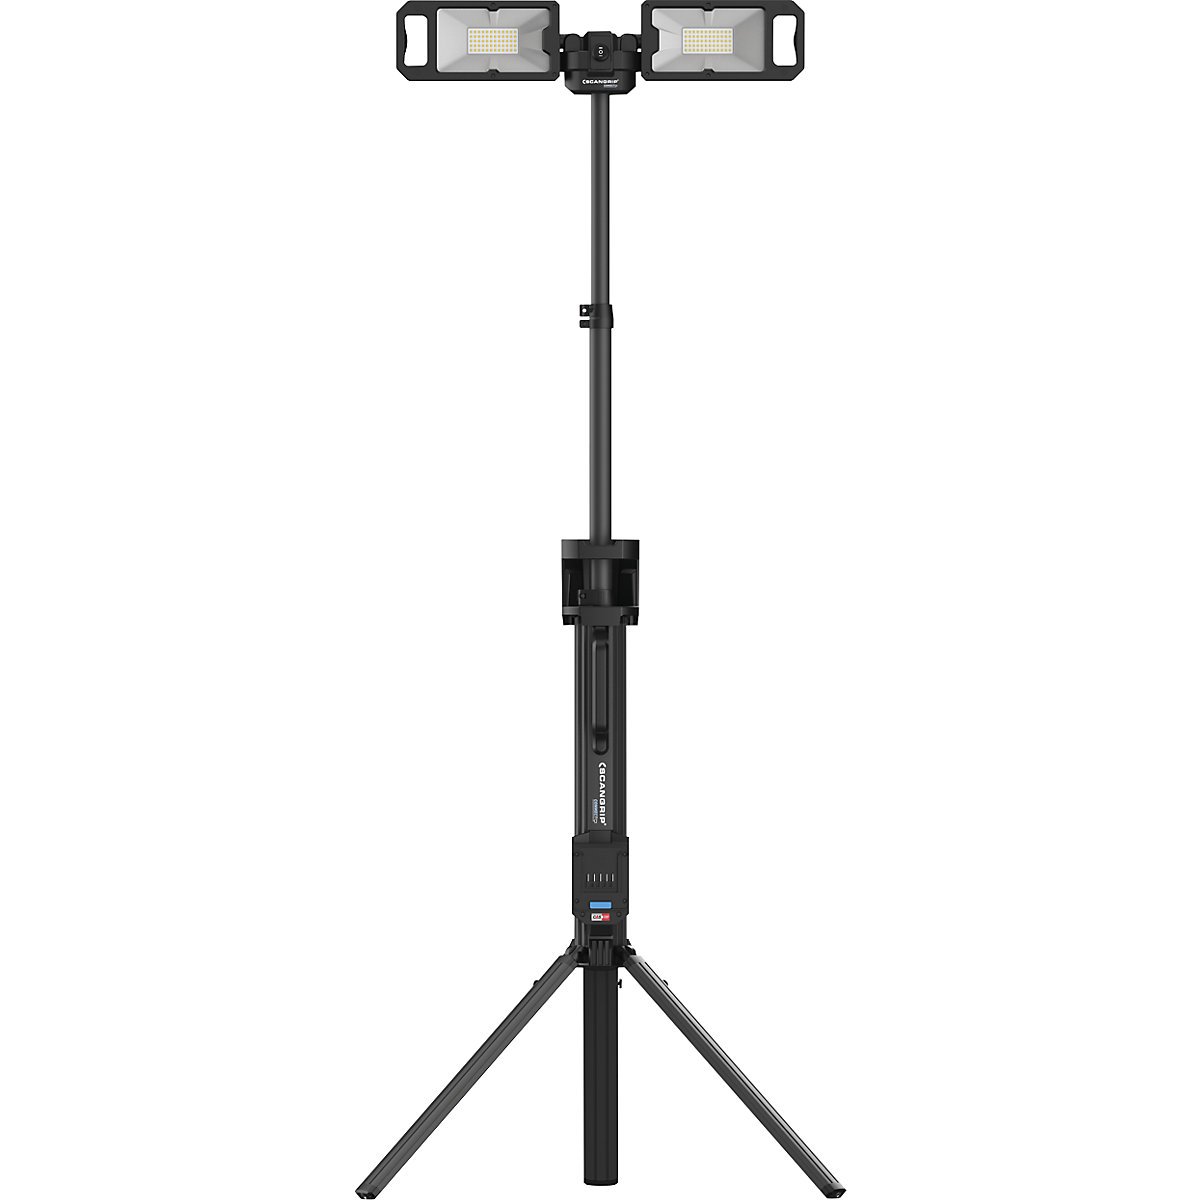 LED-bouwlamp TOWER 5 CONNECT – SCANGRIP (Productafbeelding 5)-4